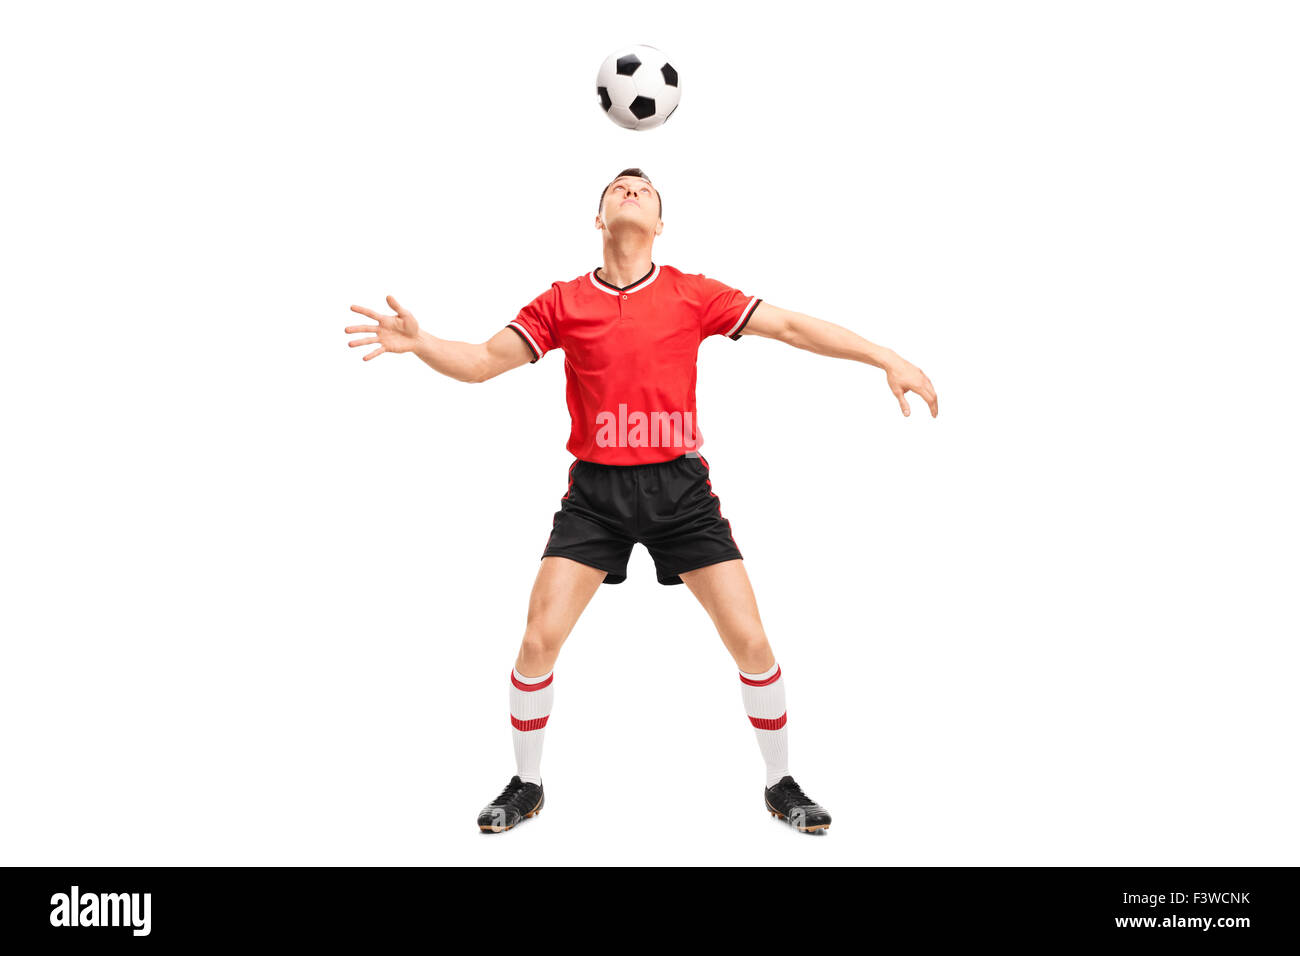 Full length portrait of a young male football player juggling a ball on his head isolated on white background Stock Photo